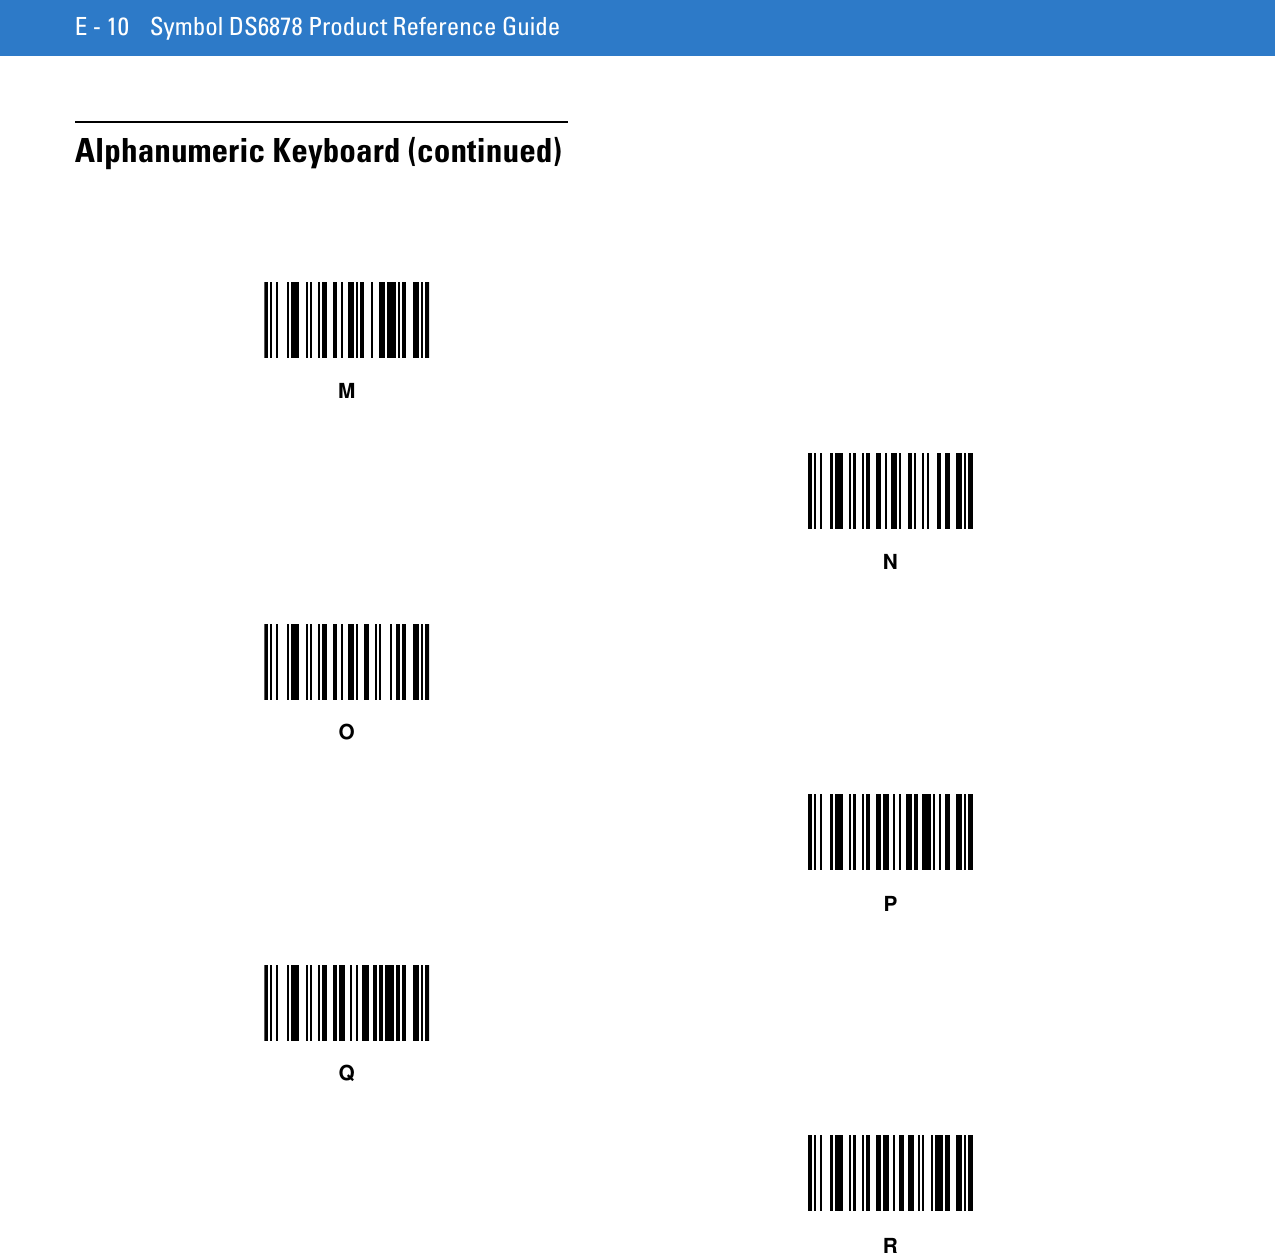 E - 10 Symbol DS6878 Product Reference GuideAlphanumeric Keyboard (continued)MNOPQR